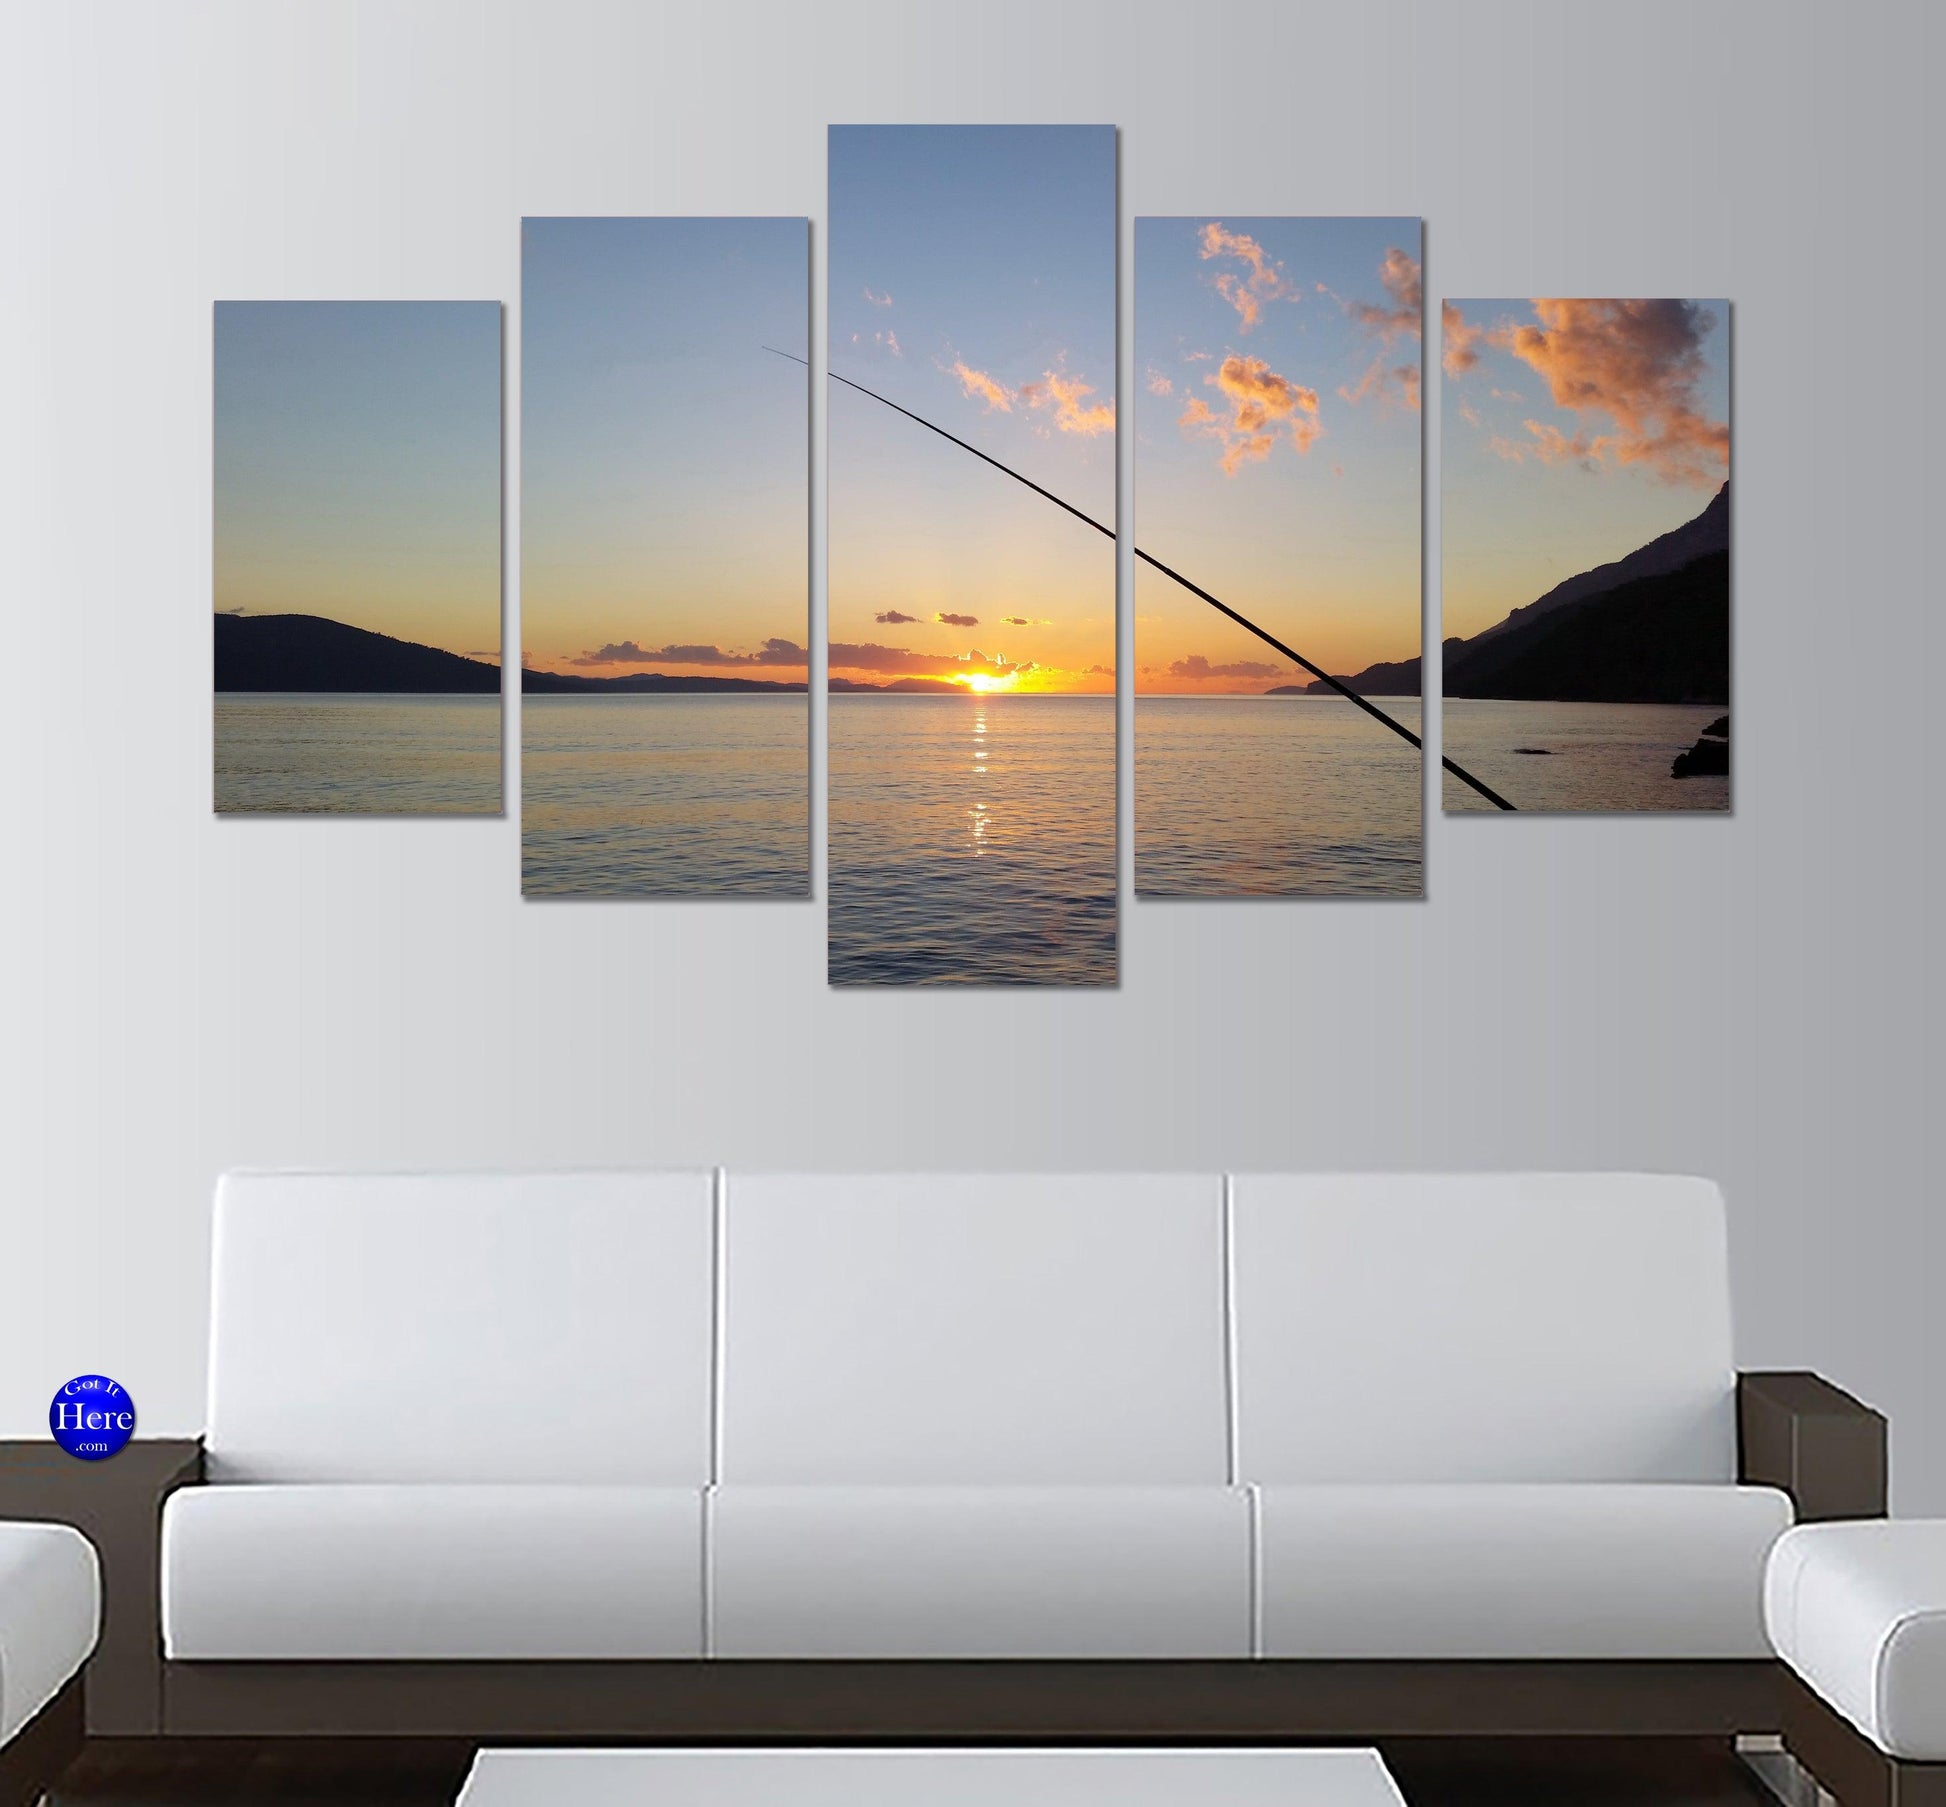 Fishing During Sunset 5 Panel Canvas Print Wall Art - GotItHere.com